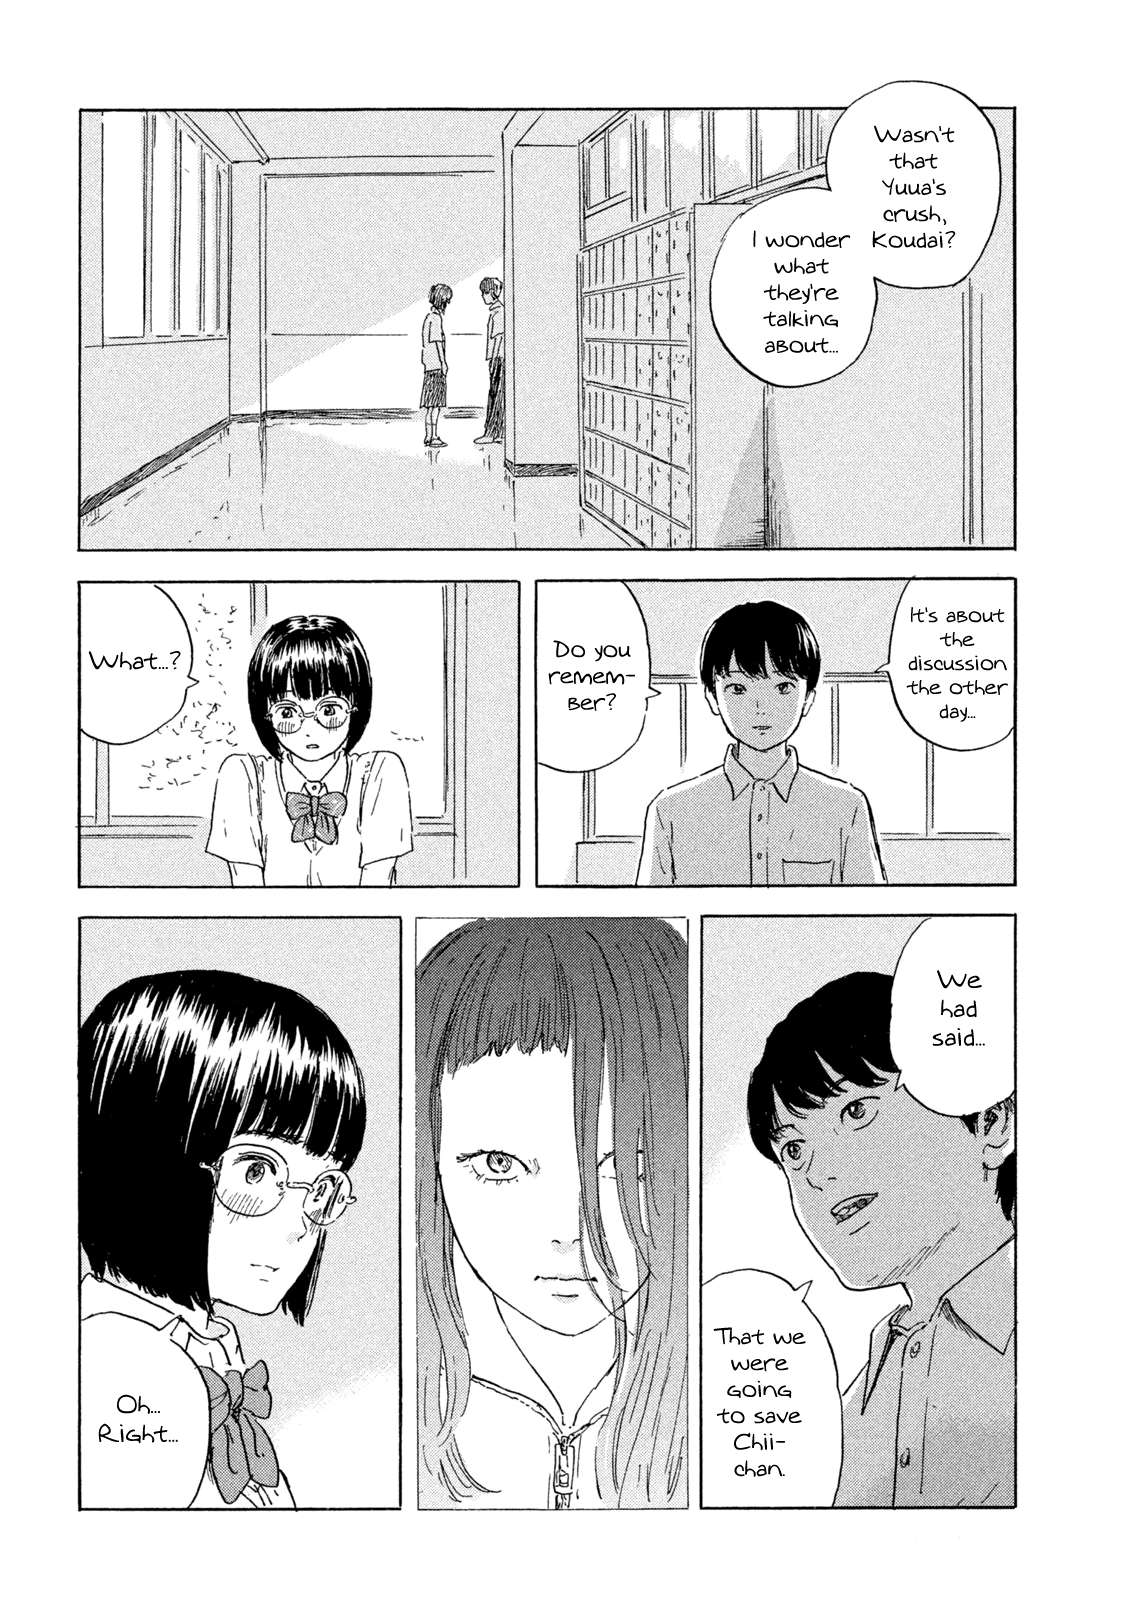 Chii-chan - chapter 2 - #6